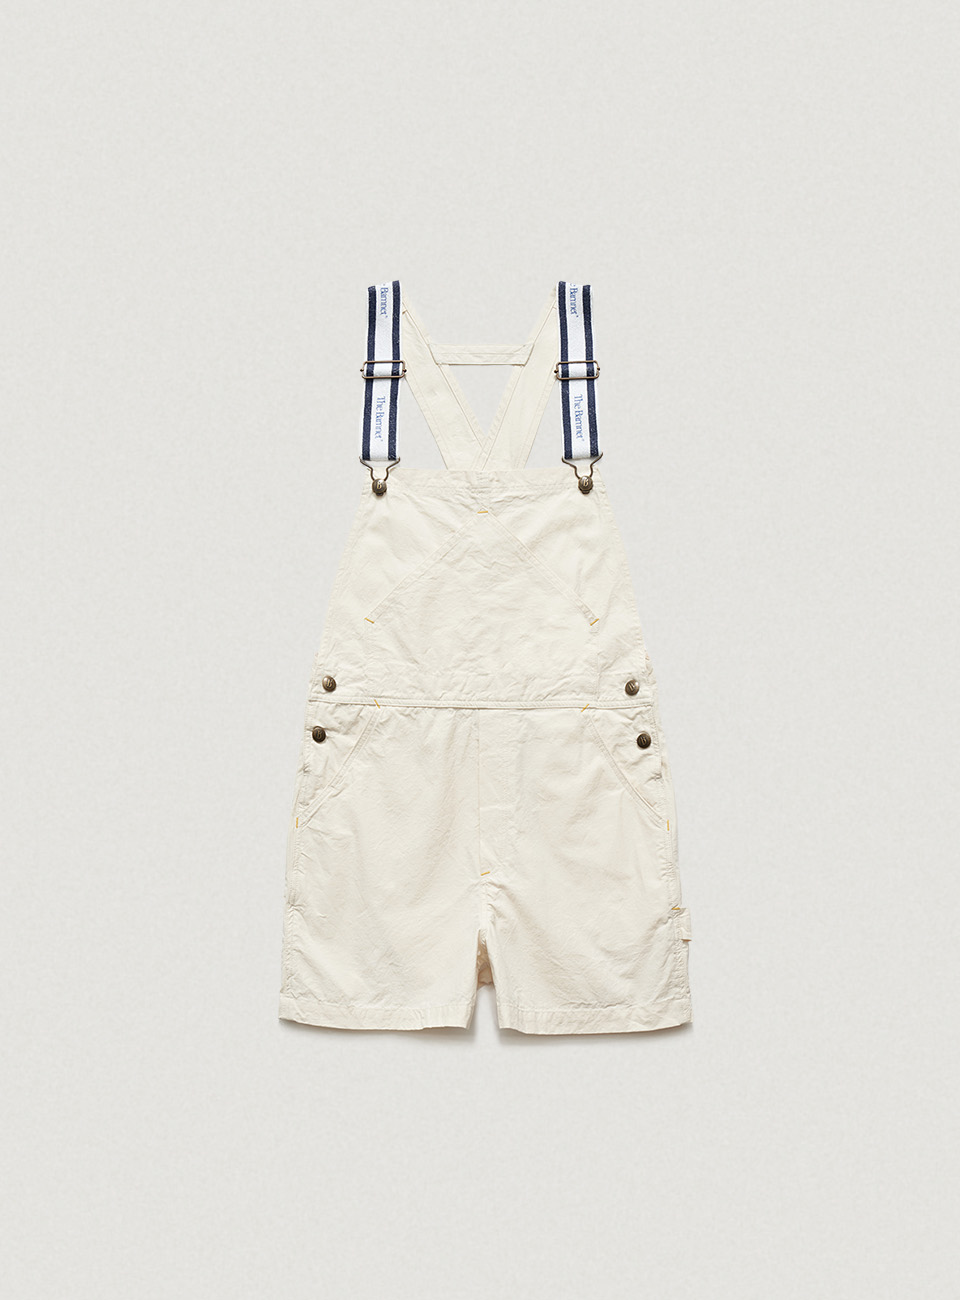 Nomad Overall Shorts